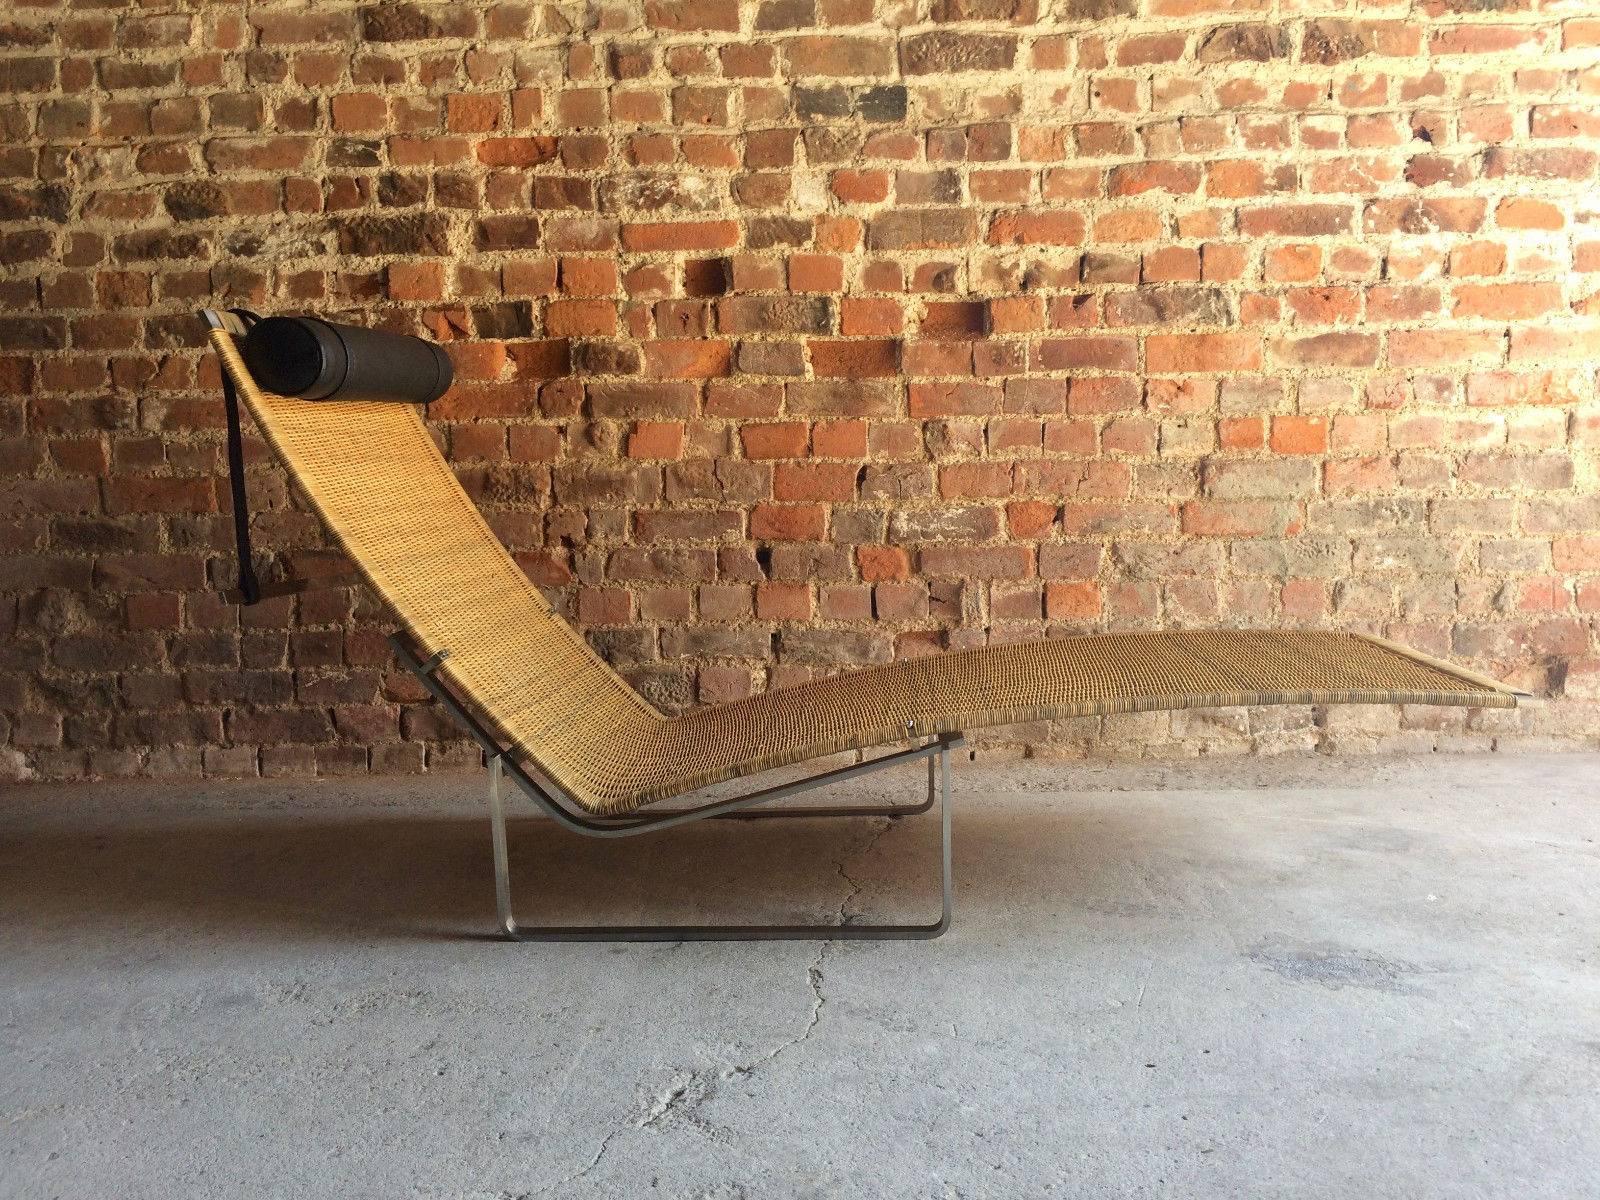 A magnificent 'right on trend' iconic designer lounger after Poul Kjærholm, a chaise longue lounger model no. PK24 designed by Poul Kjaerholm originally produced for the first time in 1965, this chair is composed of three elements, the brushed steel